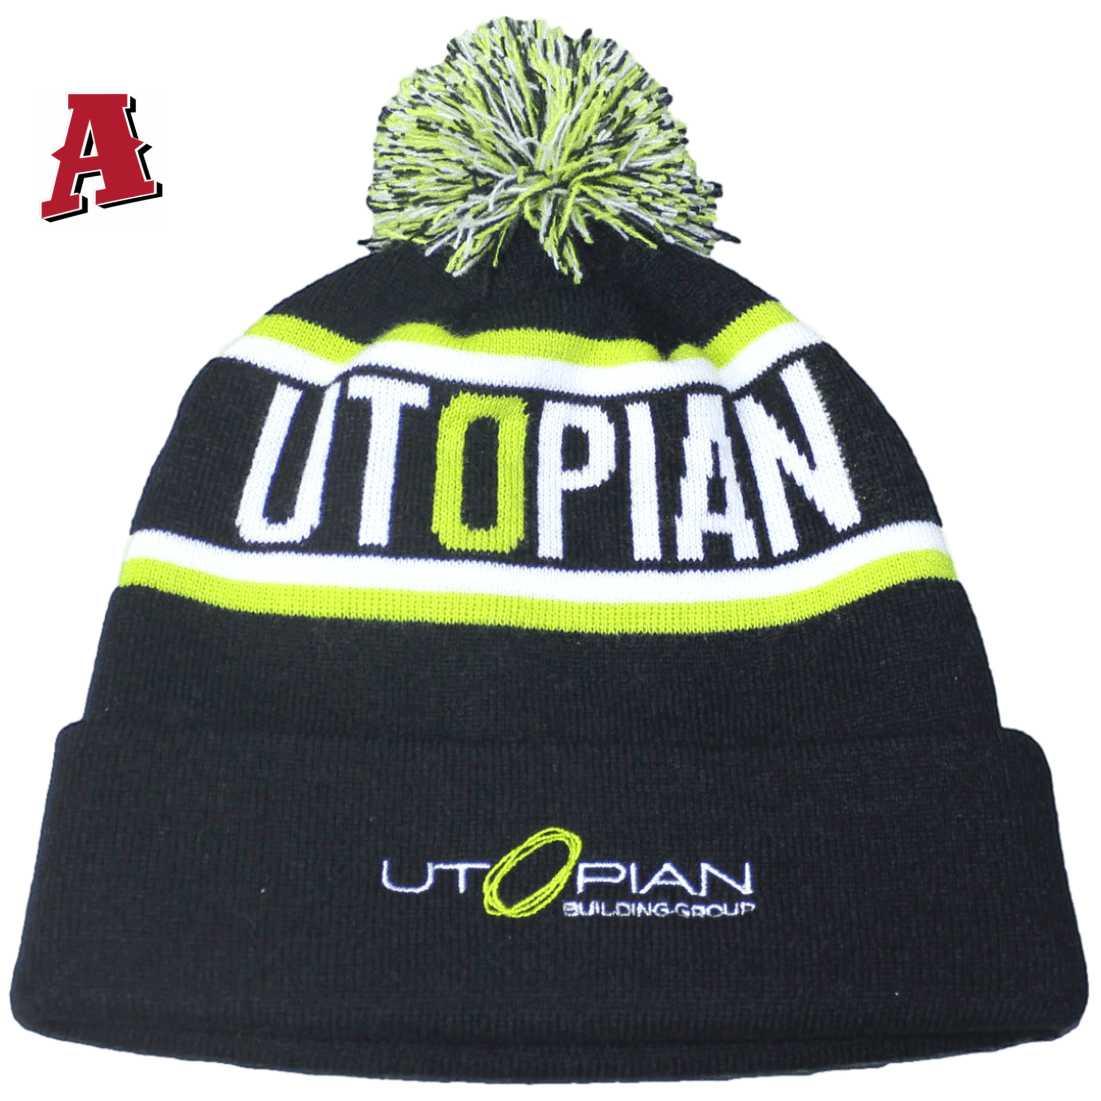 Utopian Building Group Braeside Victoria Aussie Custom Beanie with Pom POM and Roll up Cuff One Size Fits All Black Green White